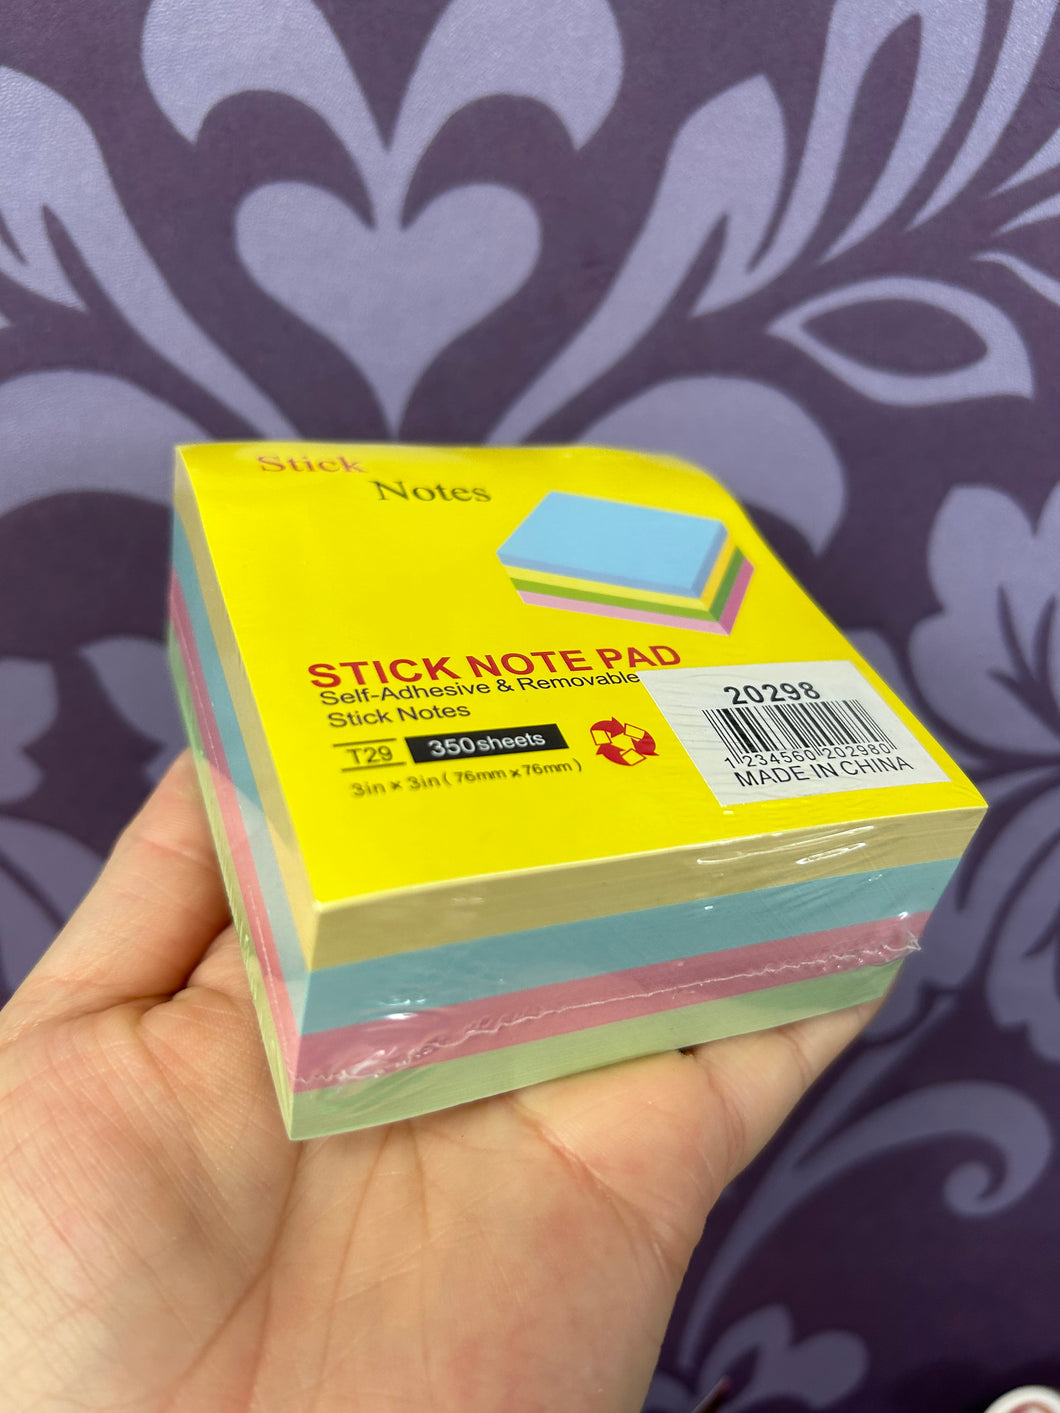 STICK NOTES 350 SHEETS